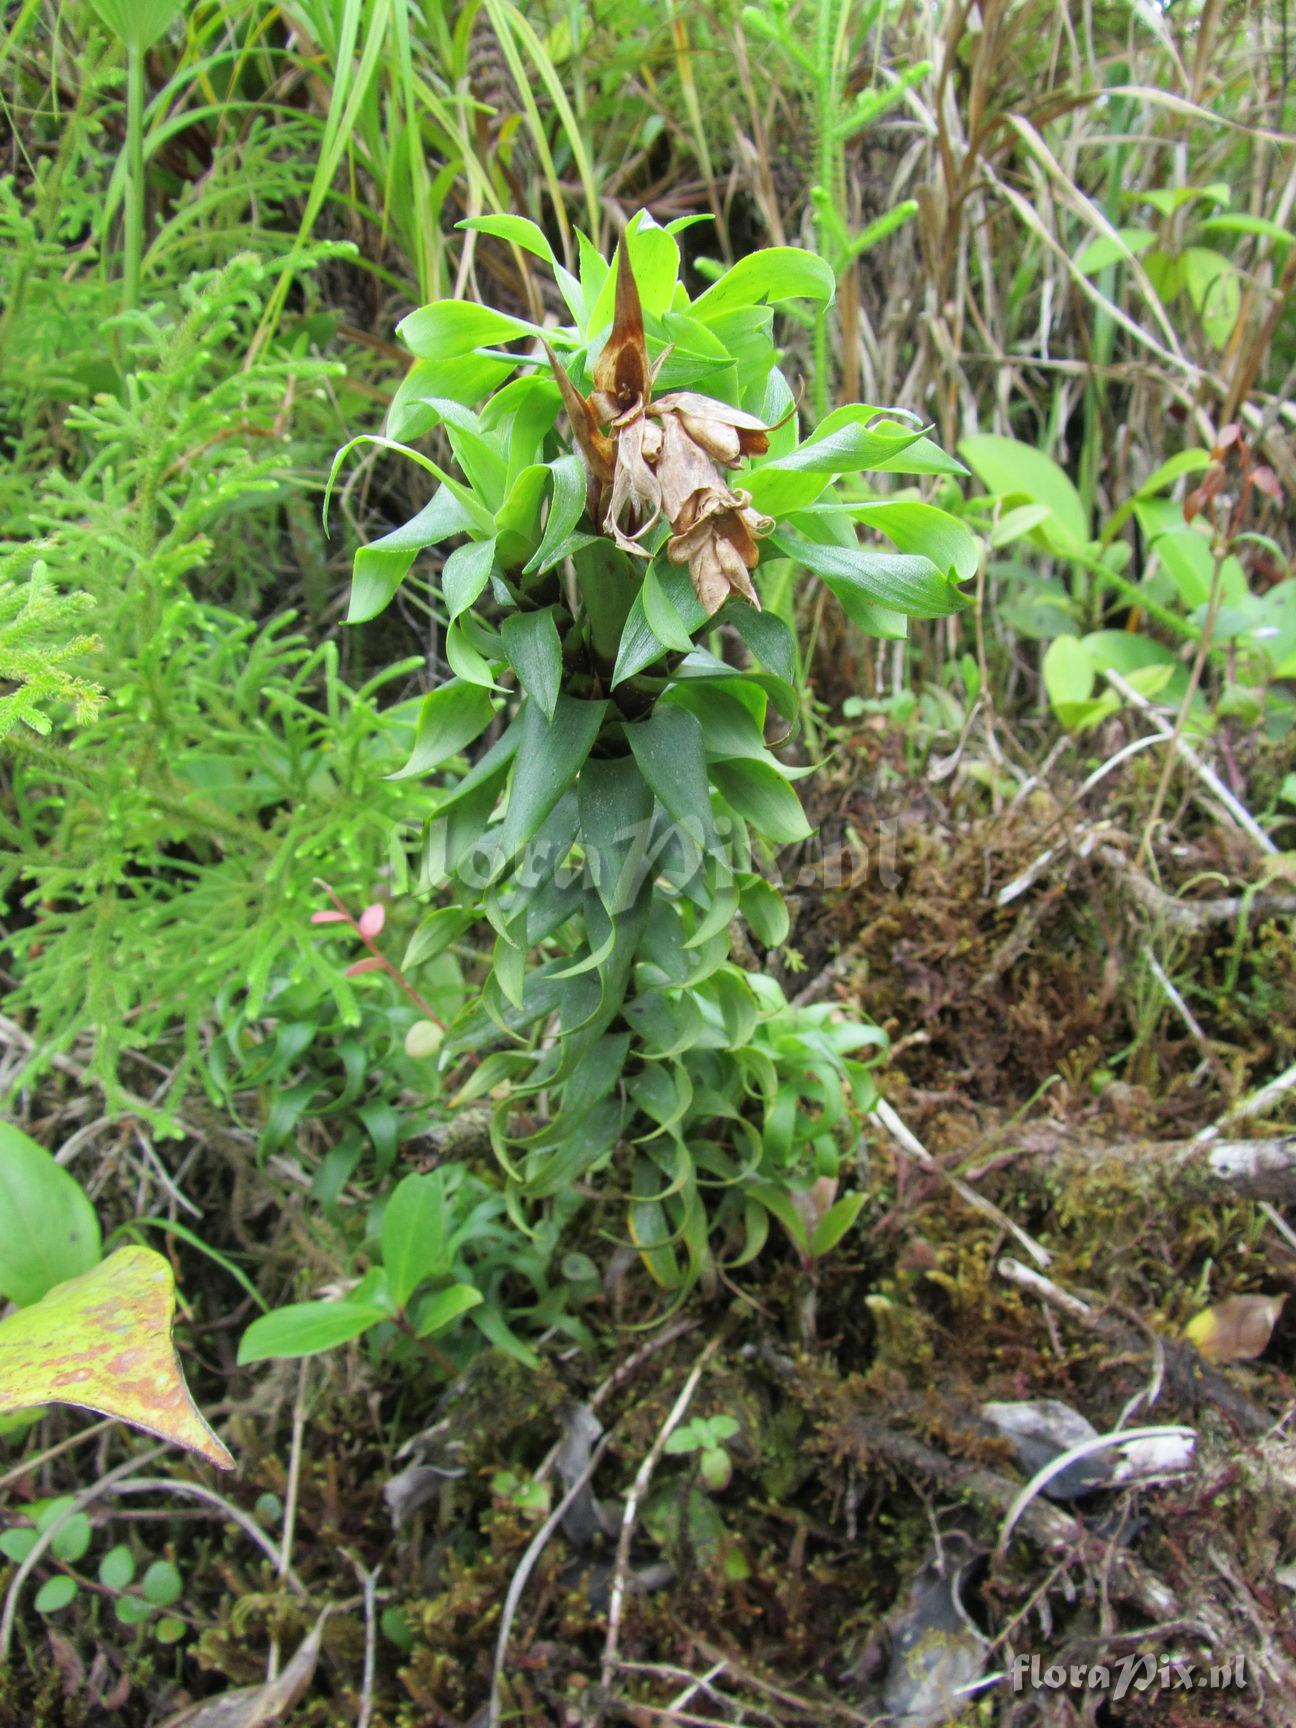 Werauhia insignis "var. brevifolia" Luther ined.